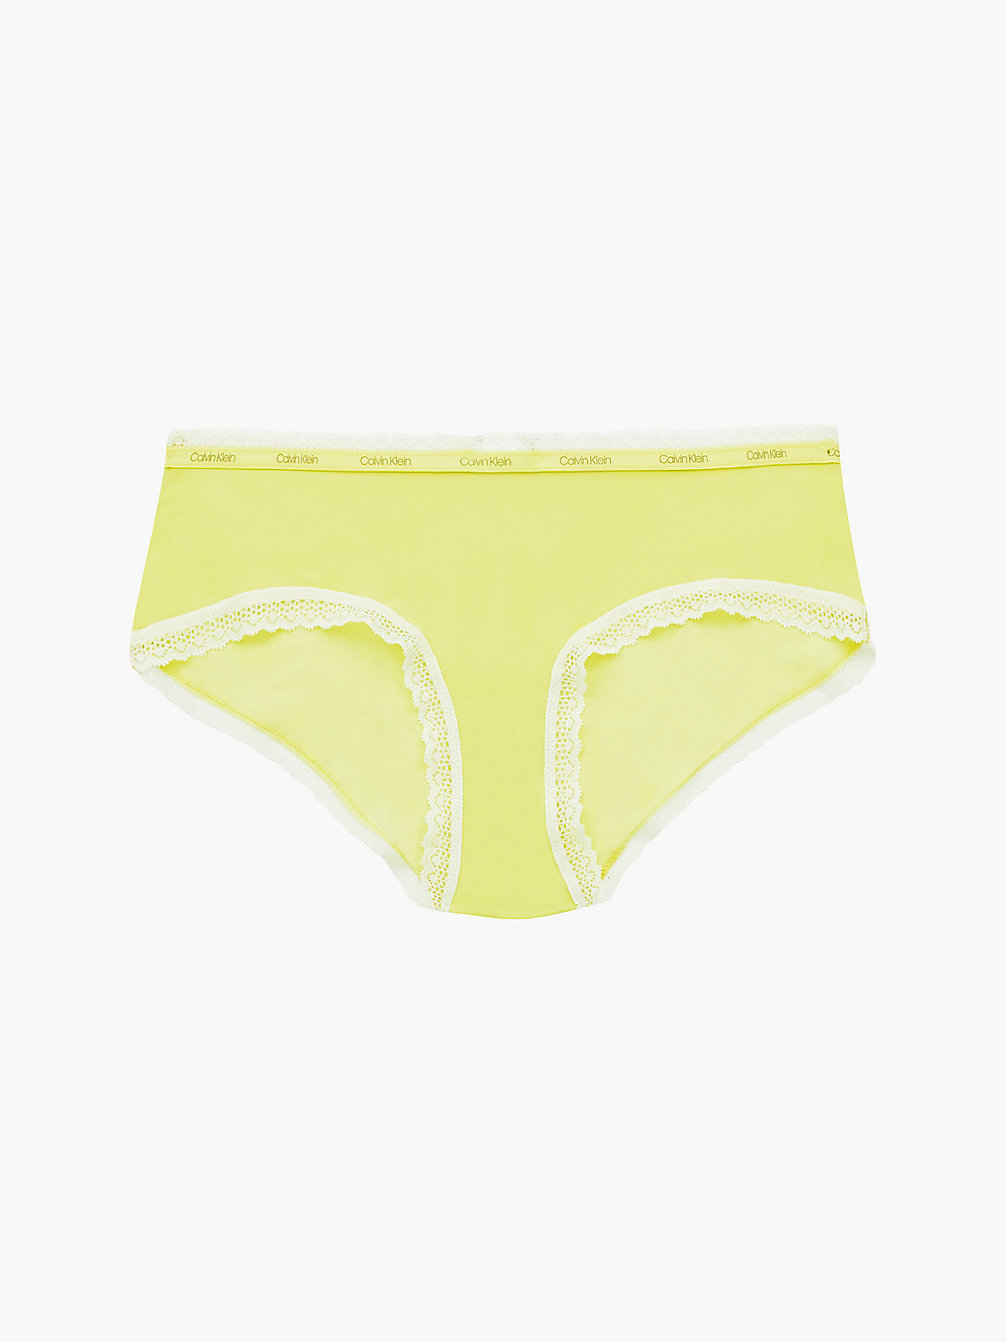 CYBER GREEN Hipster Panty - Bottoms Up undefined women Calvin Klein